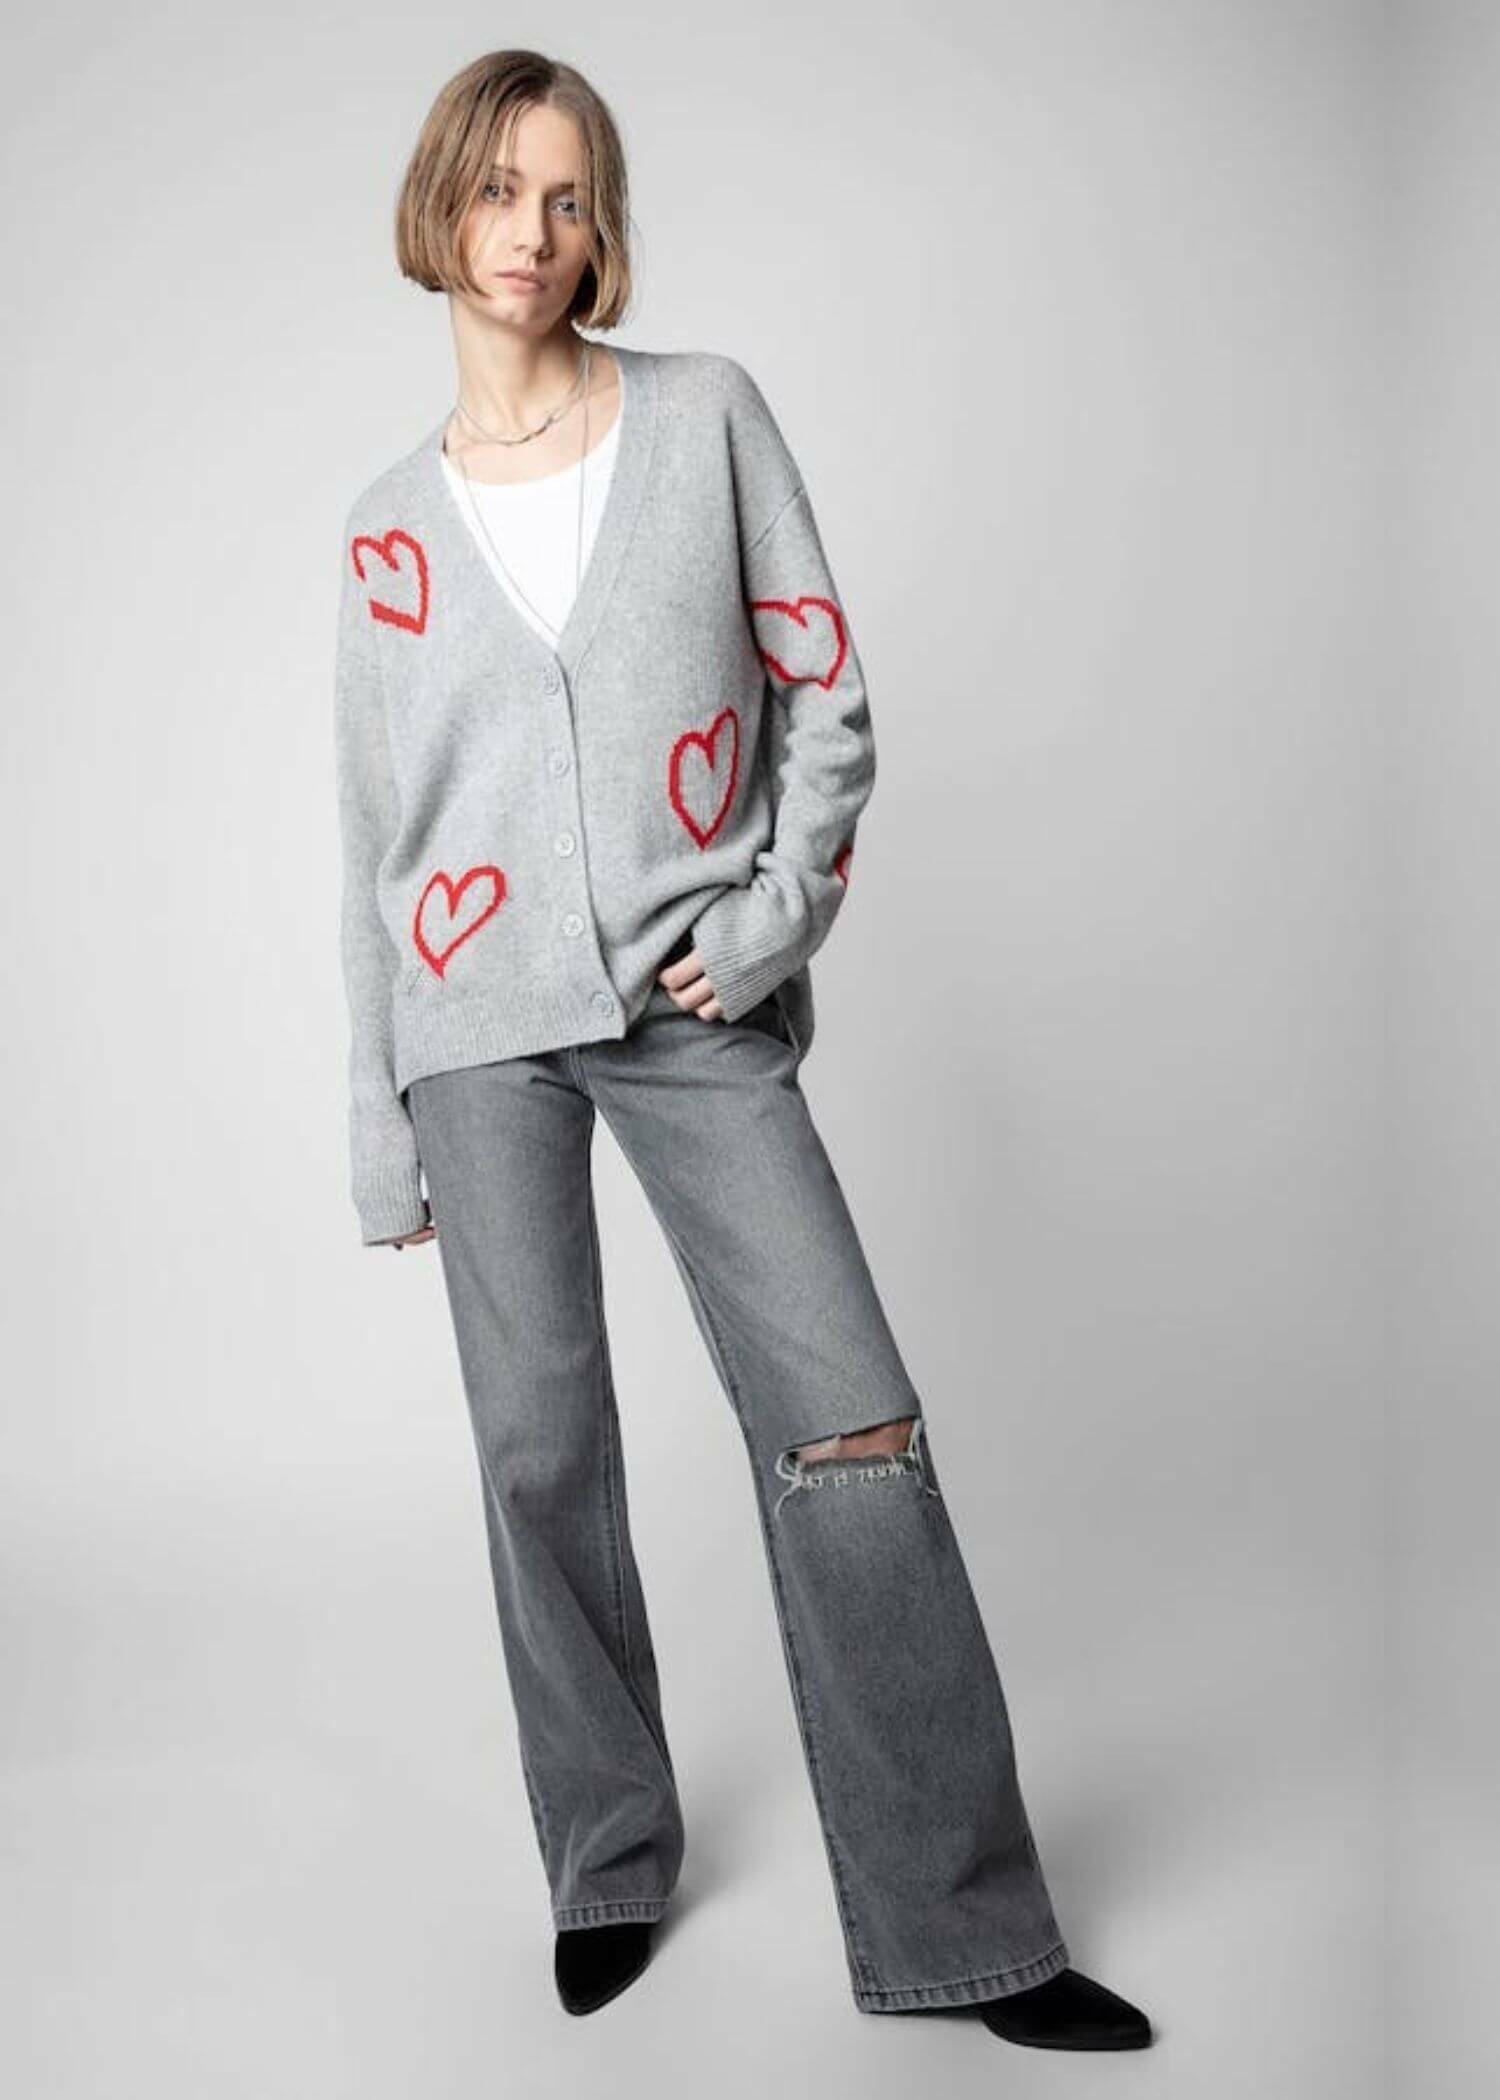 Mirka Hearts Cardigan  miteigi Women's Tops Red Love Jacquard Under The Spread Of V-neck irregular hem long sleeves Sweaters cardigans for woman in Gray Early Spring Summer Fall Autumn womens fashion season in light gray Zadig & Voltaire style